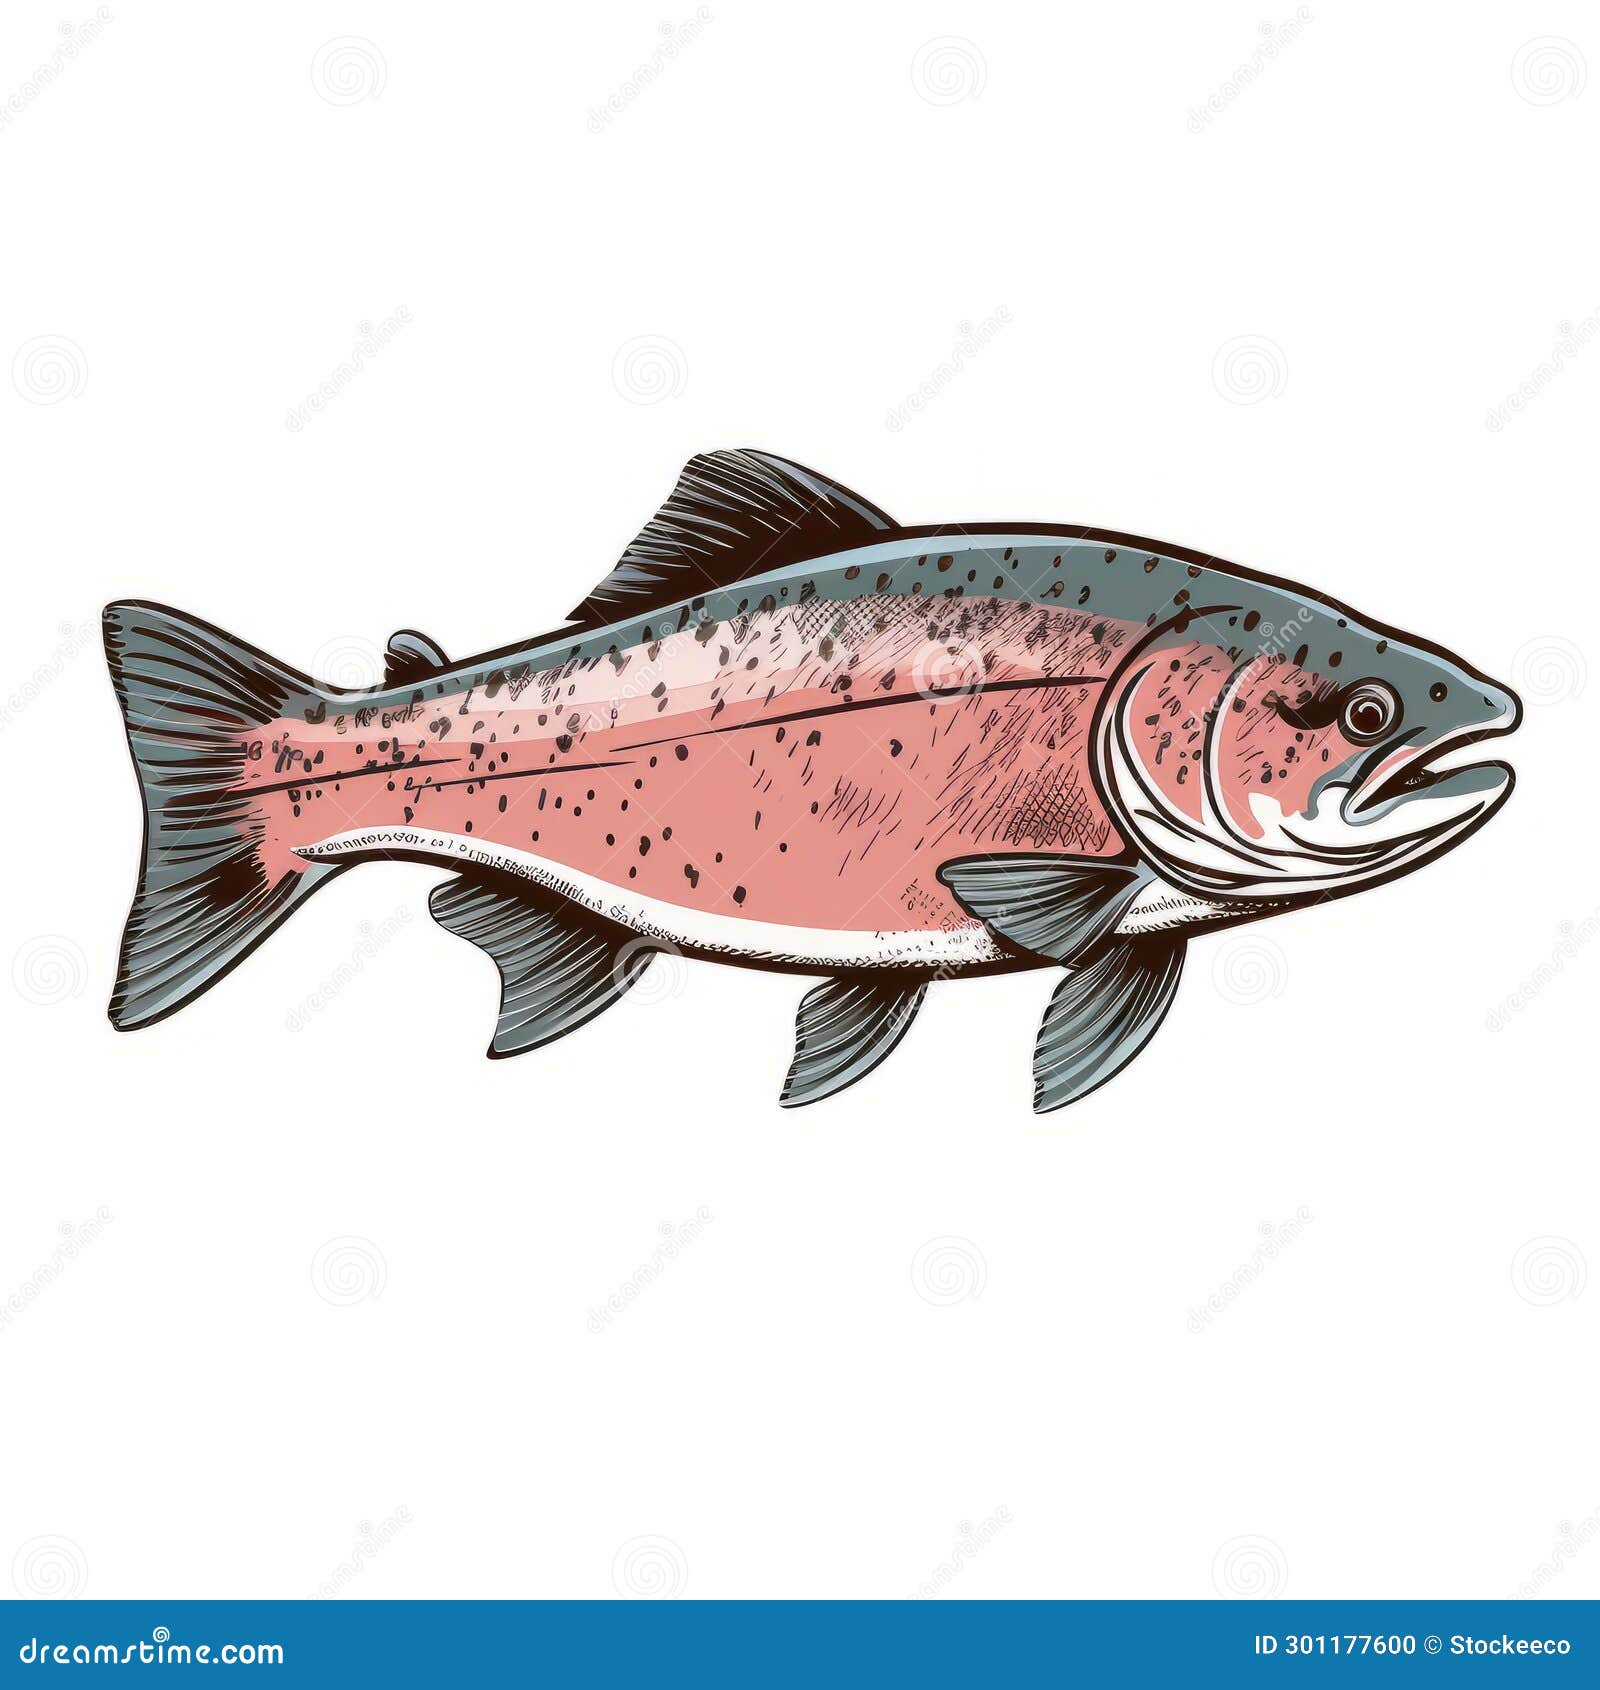 Realistic Rainbow Trout Line Drawing Illustration with Classic